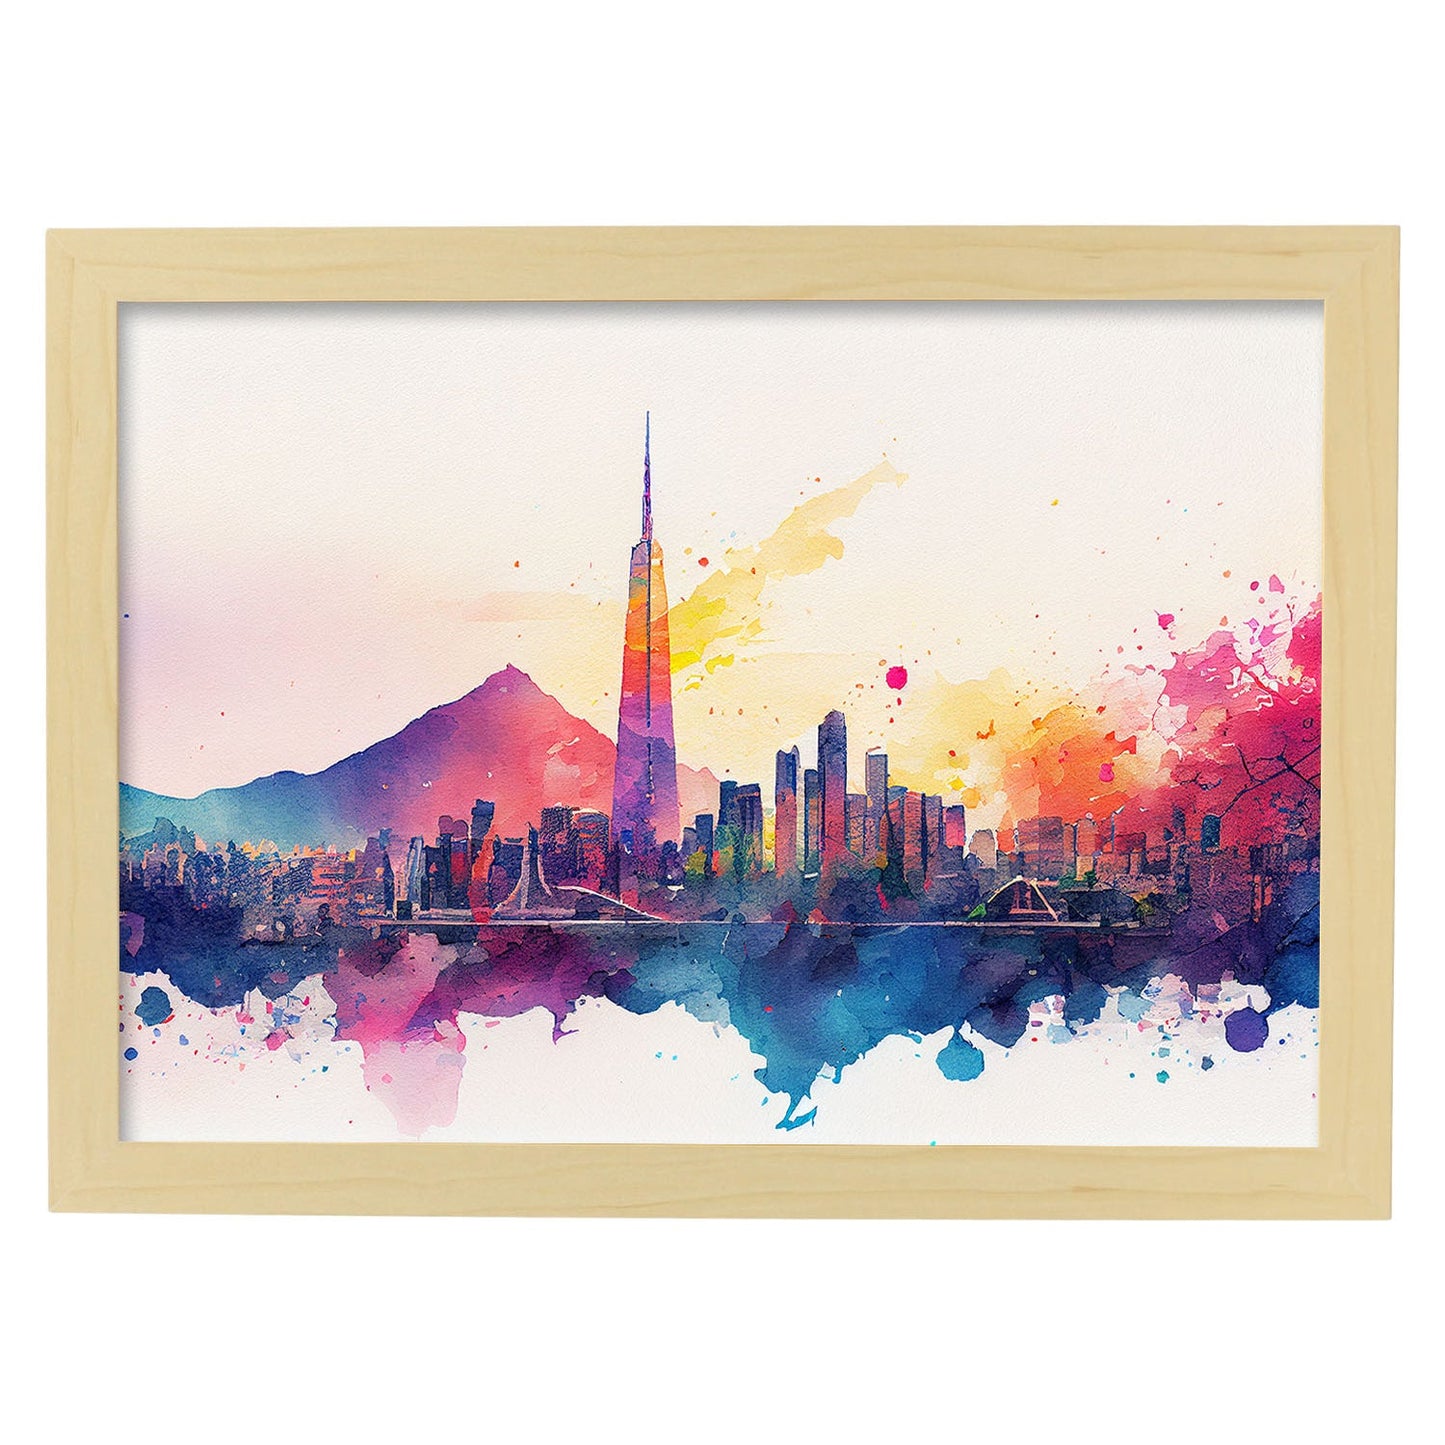 Nacnic watercolor of a skyline of the city of Seoul. Aesthetic Wall Art Prints for Bedroom or Living Room Design.-Artwork-Nacnic-A4-Marco Madera Clara-Nacnic Estudio SL